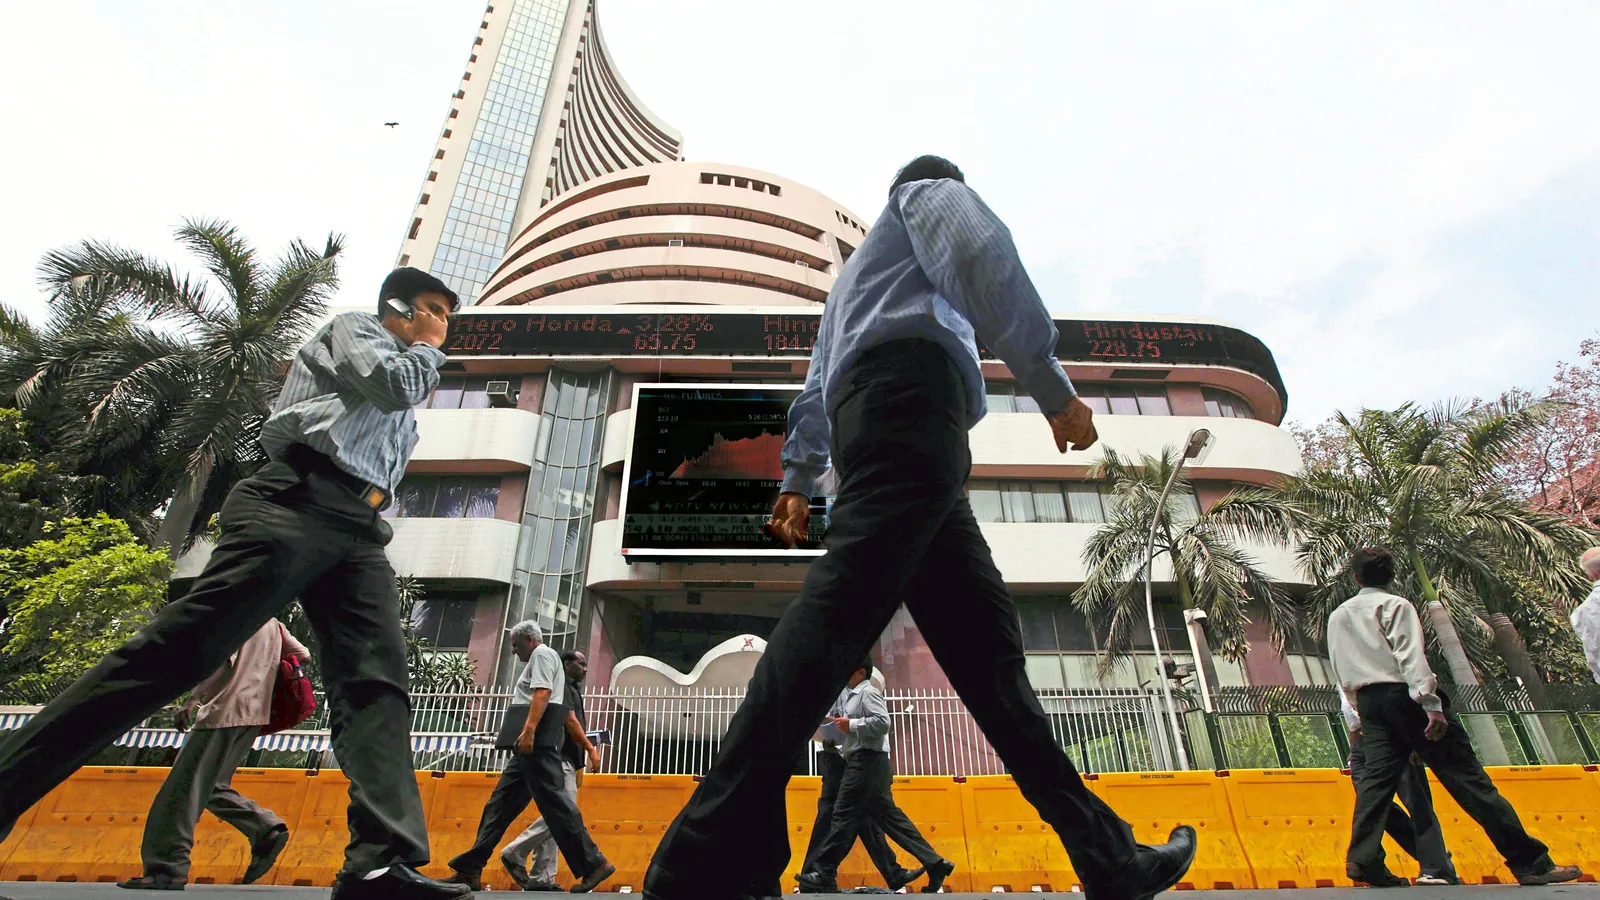 Sensex drops 276 points to end day at 54,088; Nifty closes below 17,000